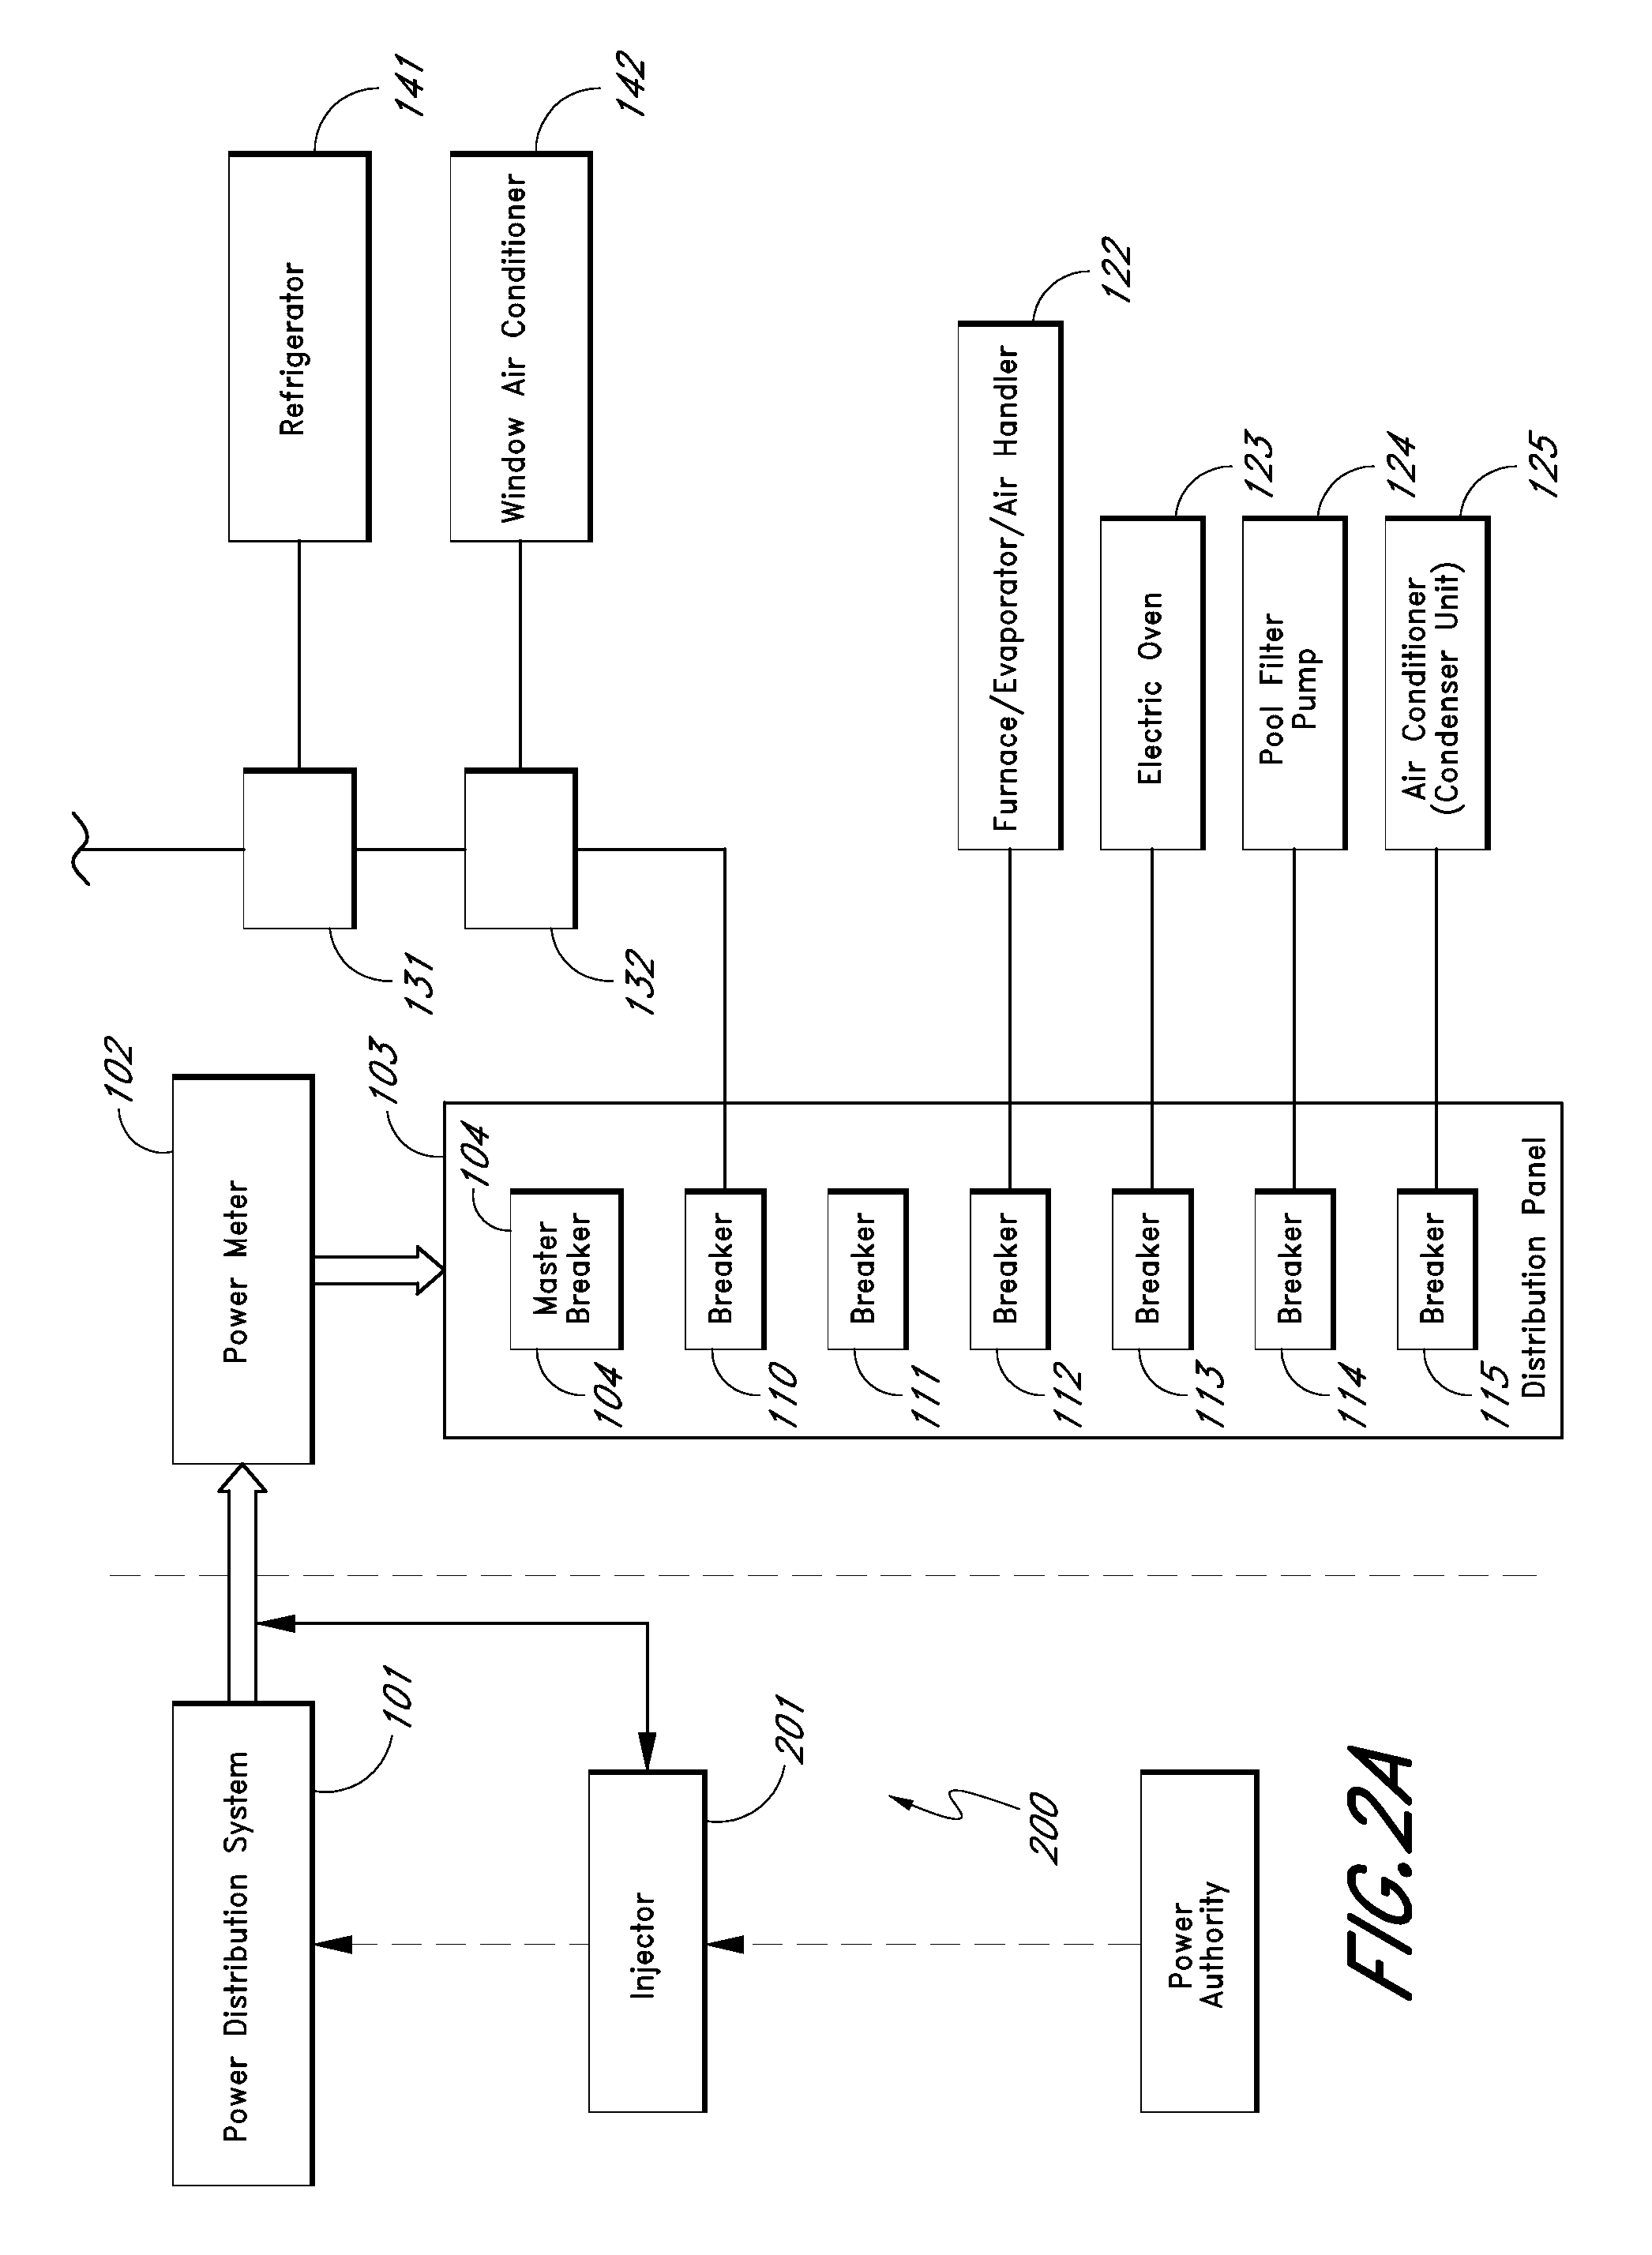 Method and apparatus for energy-efficient temperature-based systems management